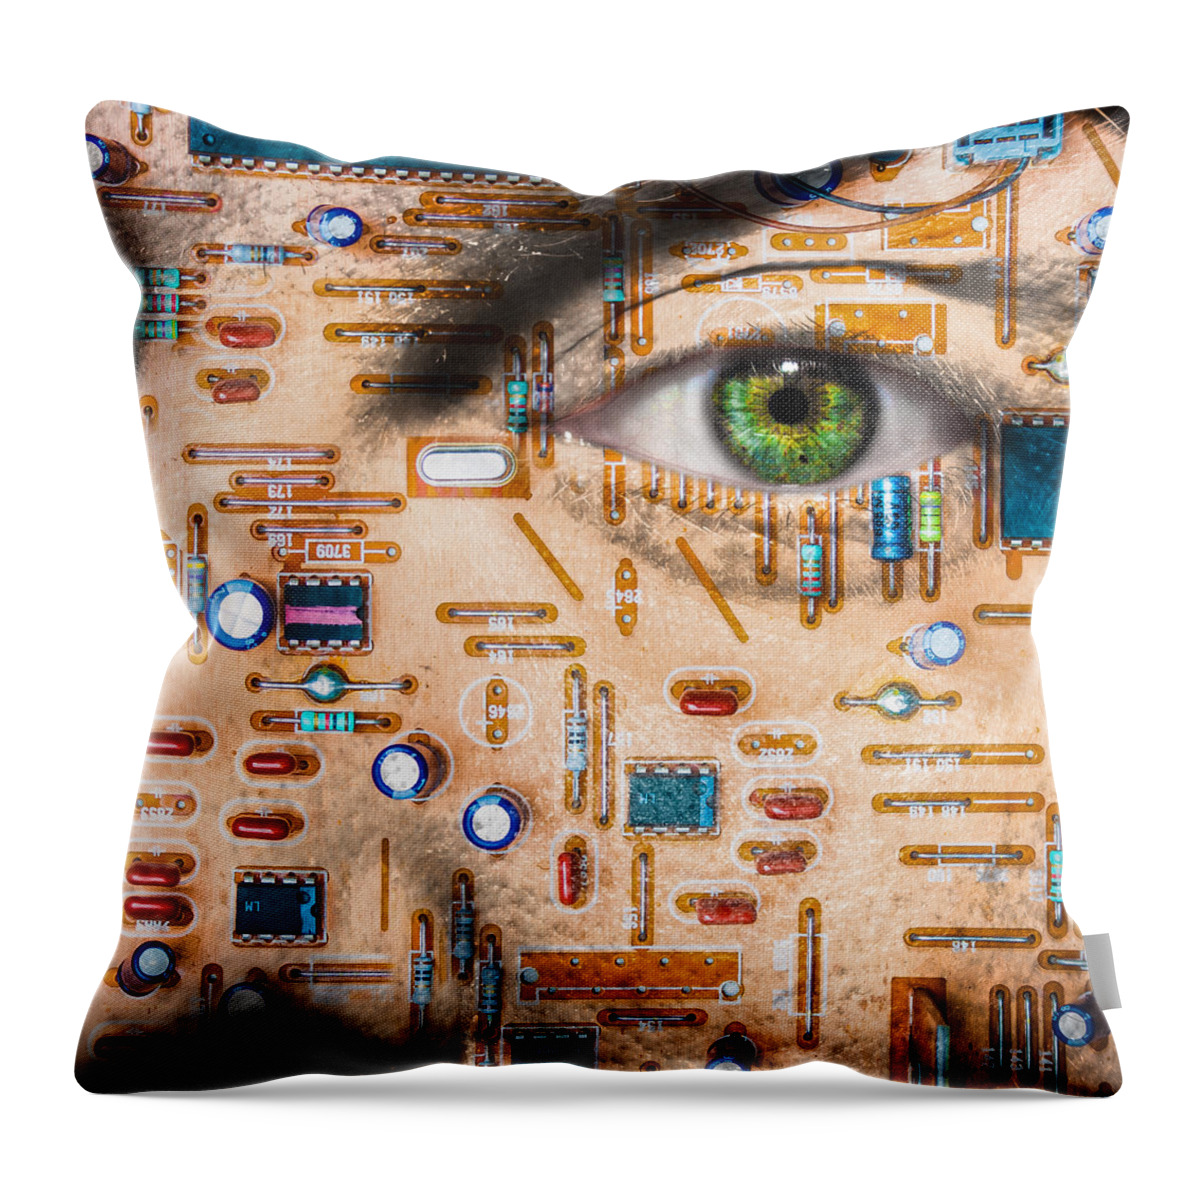 Eye Throw Pillow featuring the photograph Bionic Man by Semmick Photo